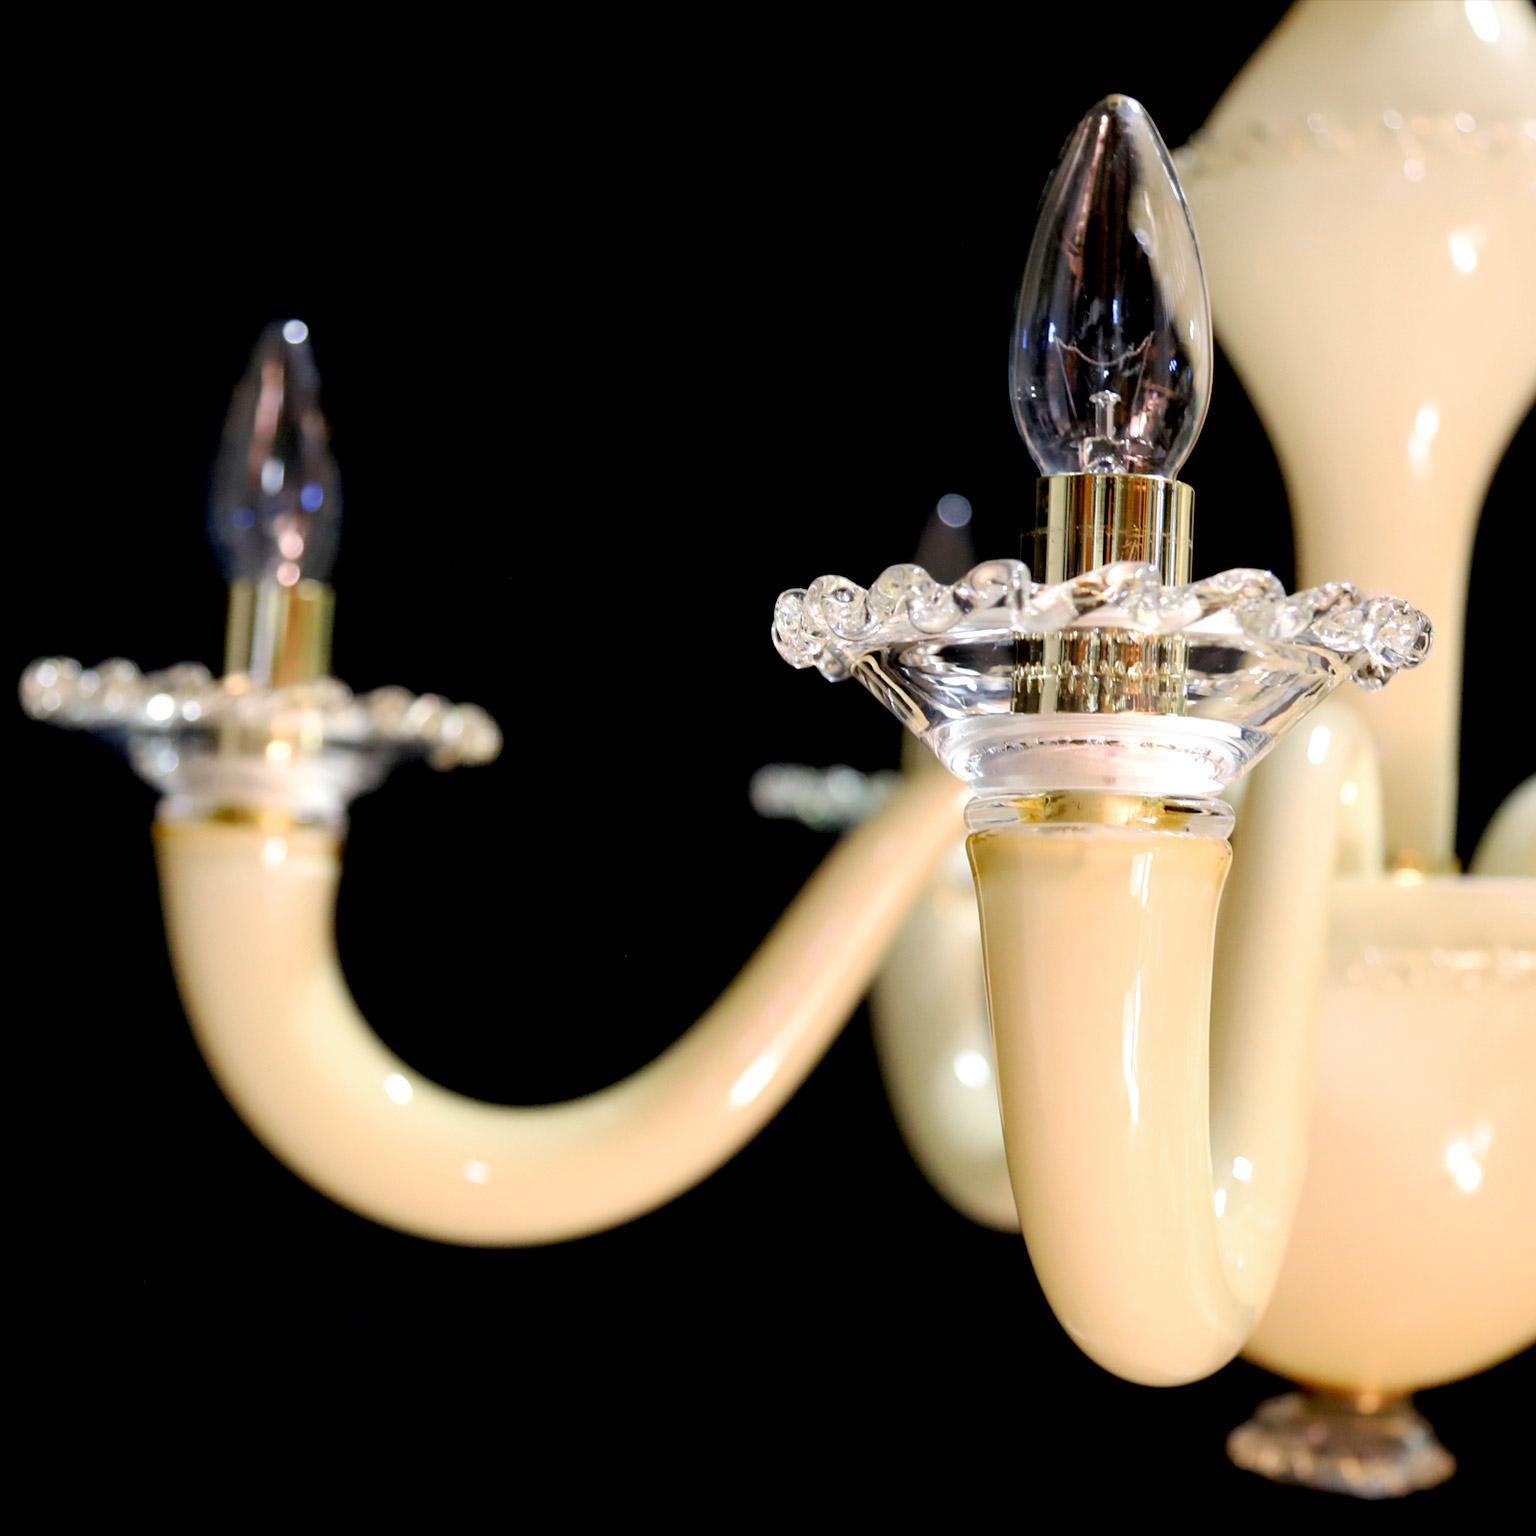 Gino Cenedese ivory and gold 5-light chandelier.